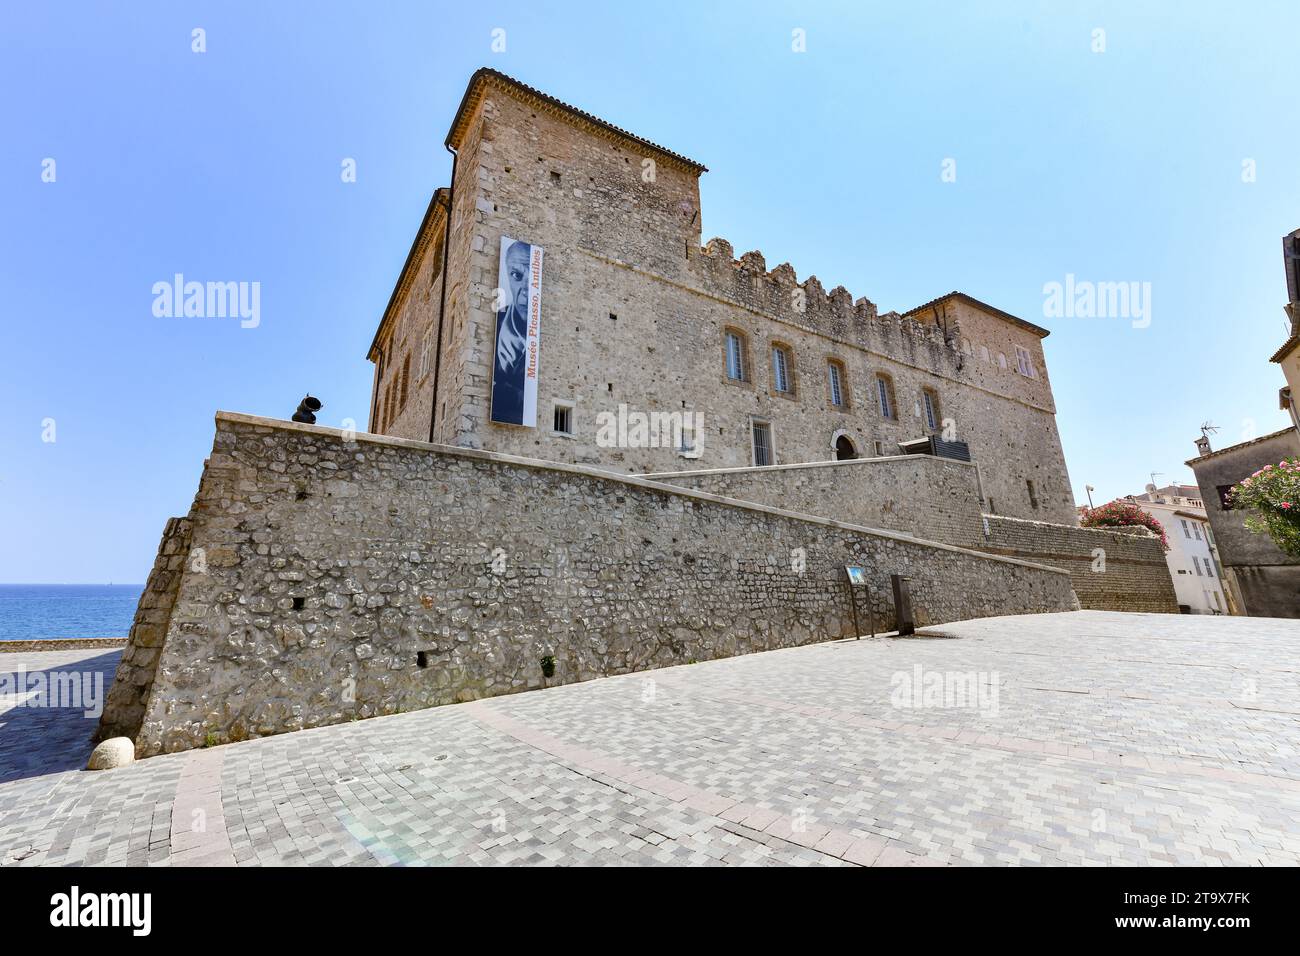 Jul 24, 2022: Antibes, France: Grimaldi Castle facade shown in Antibes, France. Grimaldi Castle shelter the Picasso Museum, where are exposed painting Stock Photo